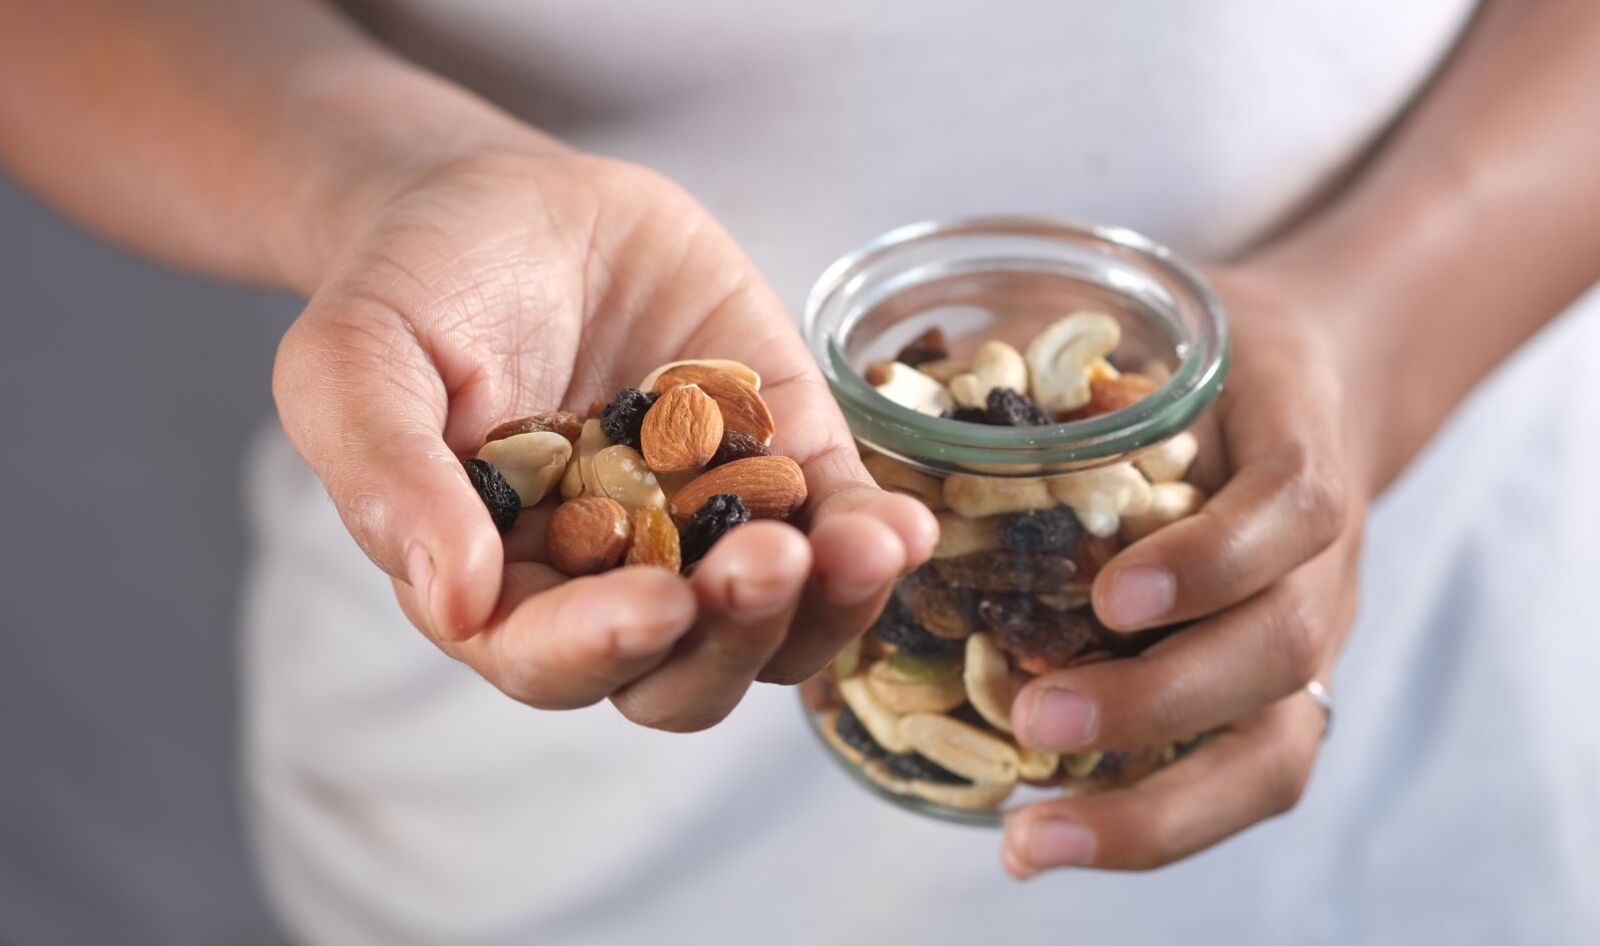 A Handful of Nuts Daily Could Reduce Depression Risk By 17 Percent, Study Finds